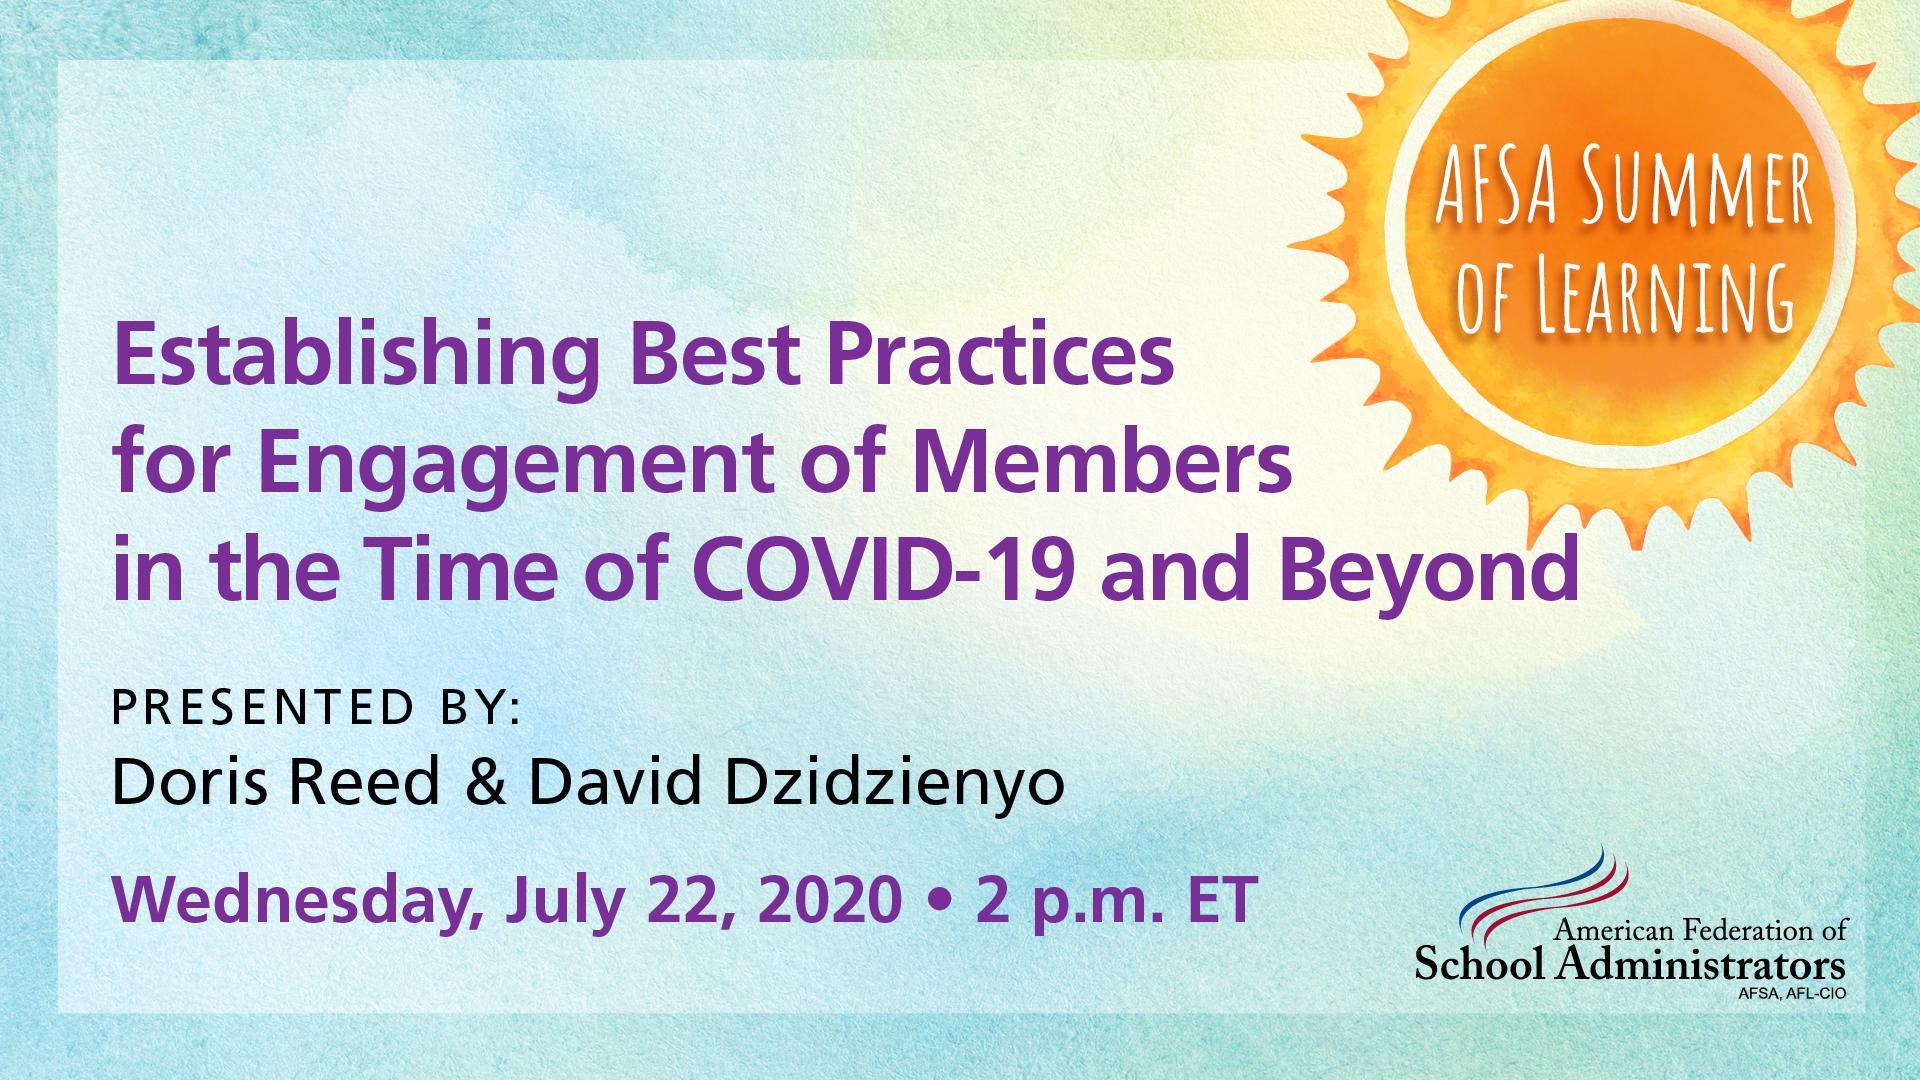 Establishing Best Practices for Continued Engagement of Members in the Time of COVID-19 and Beyond